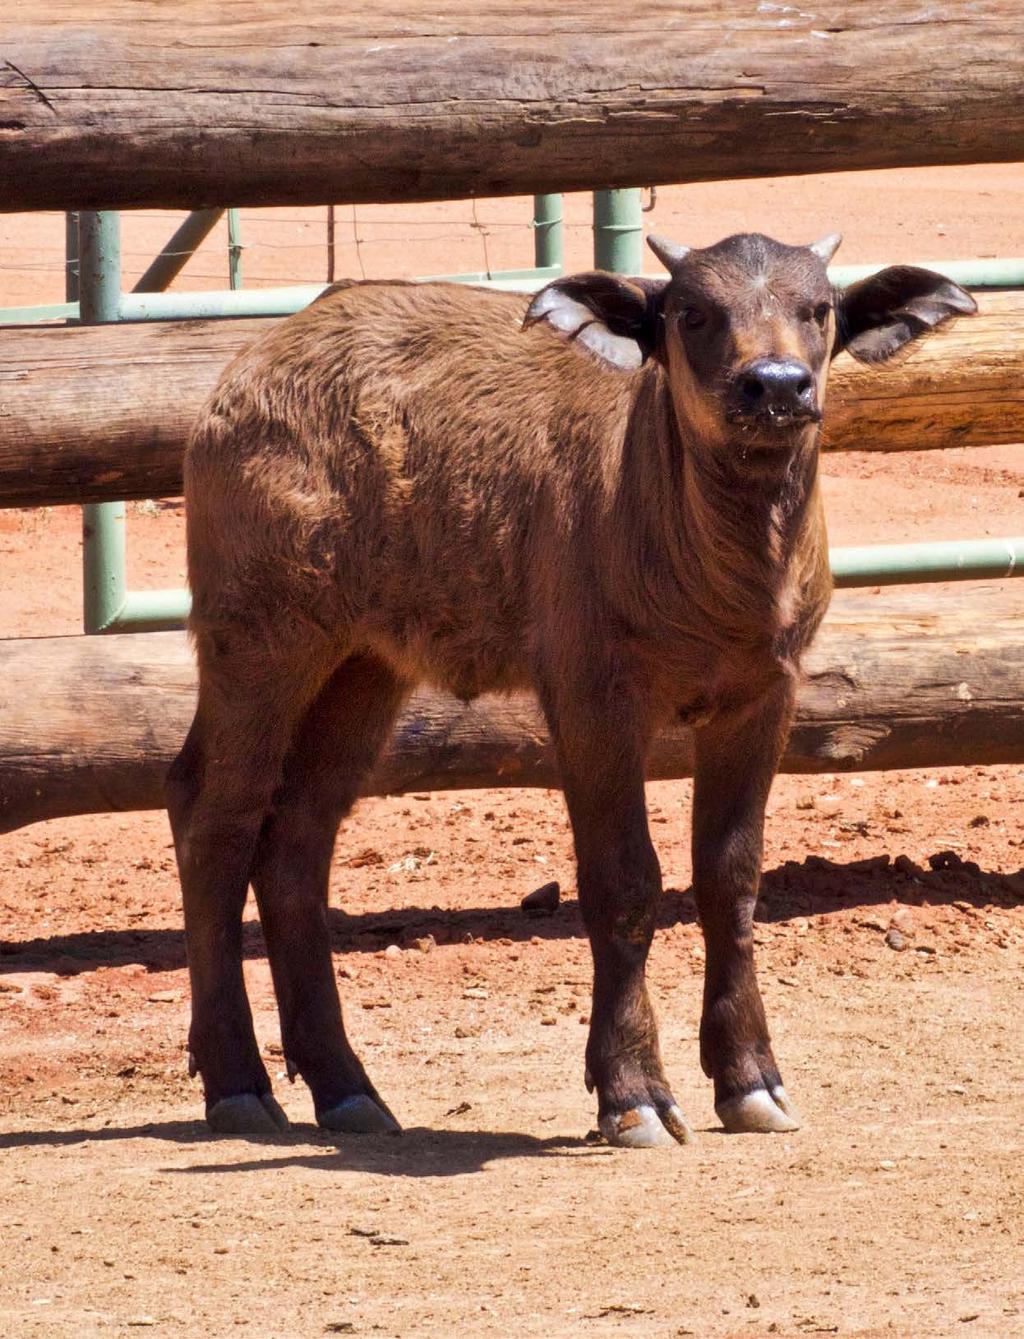 Pumelelo, the first African buffalo (Syncerus caffer)